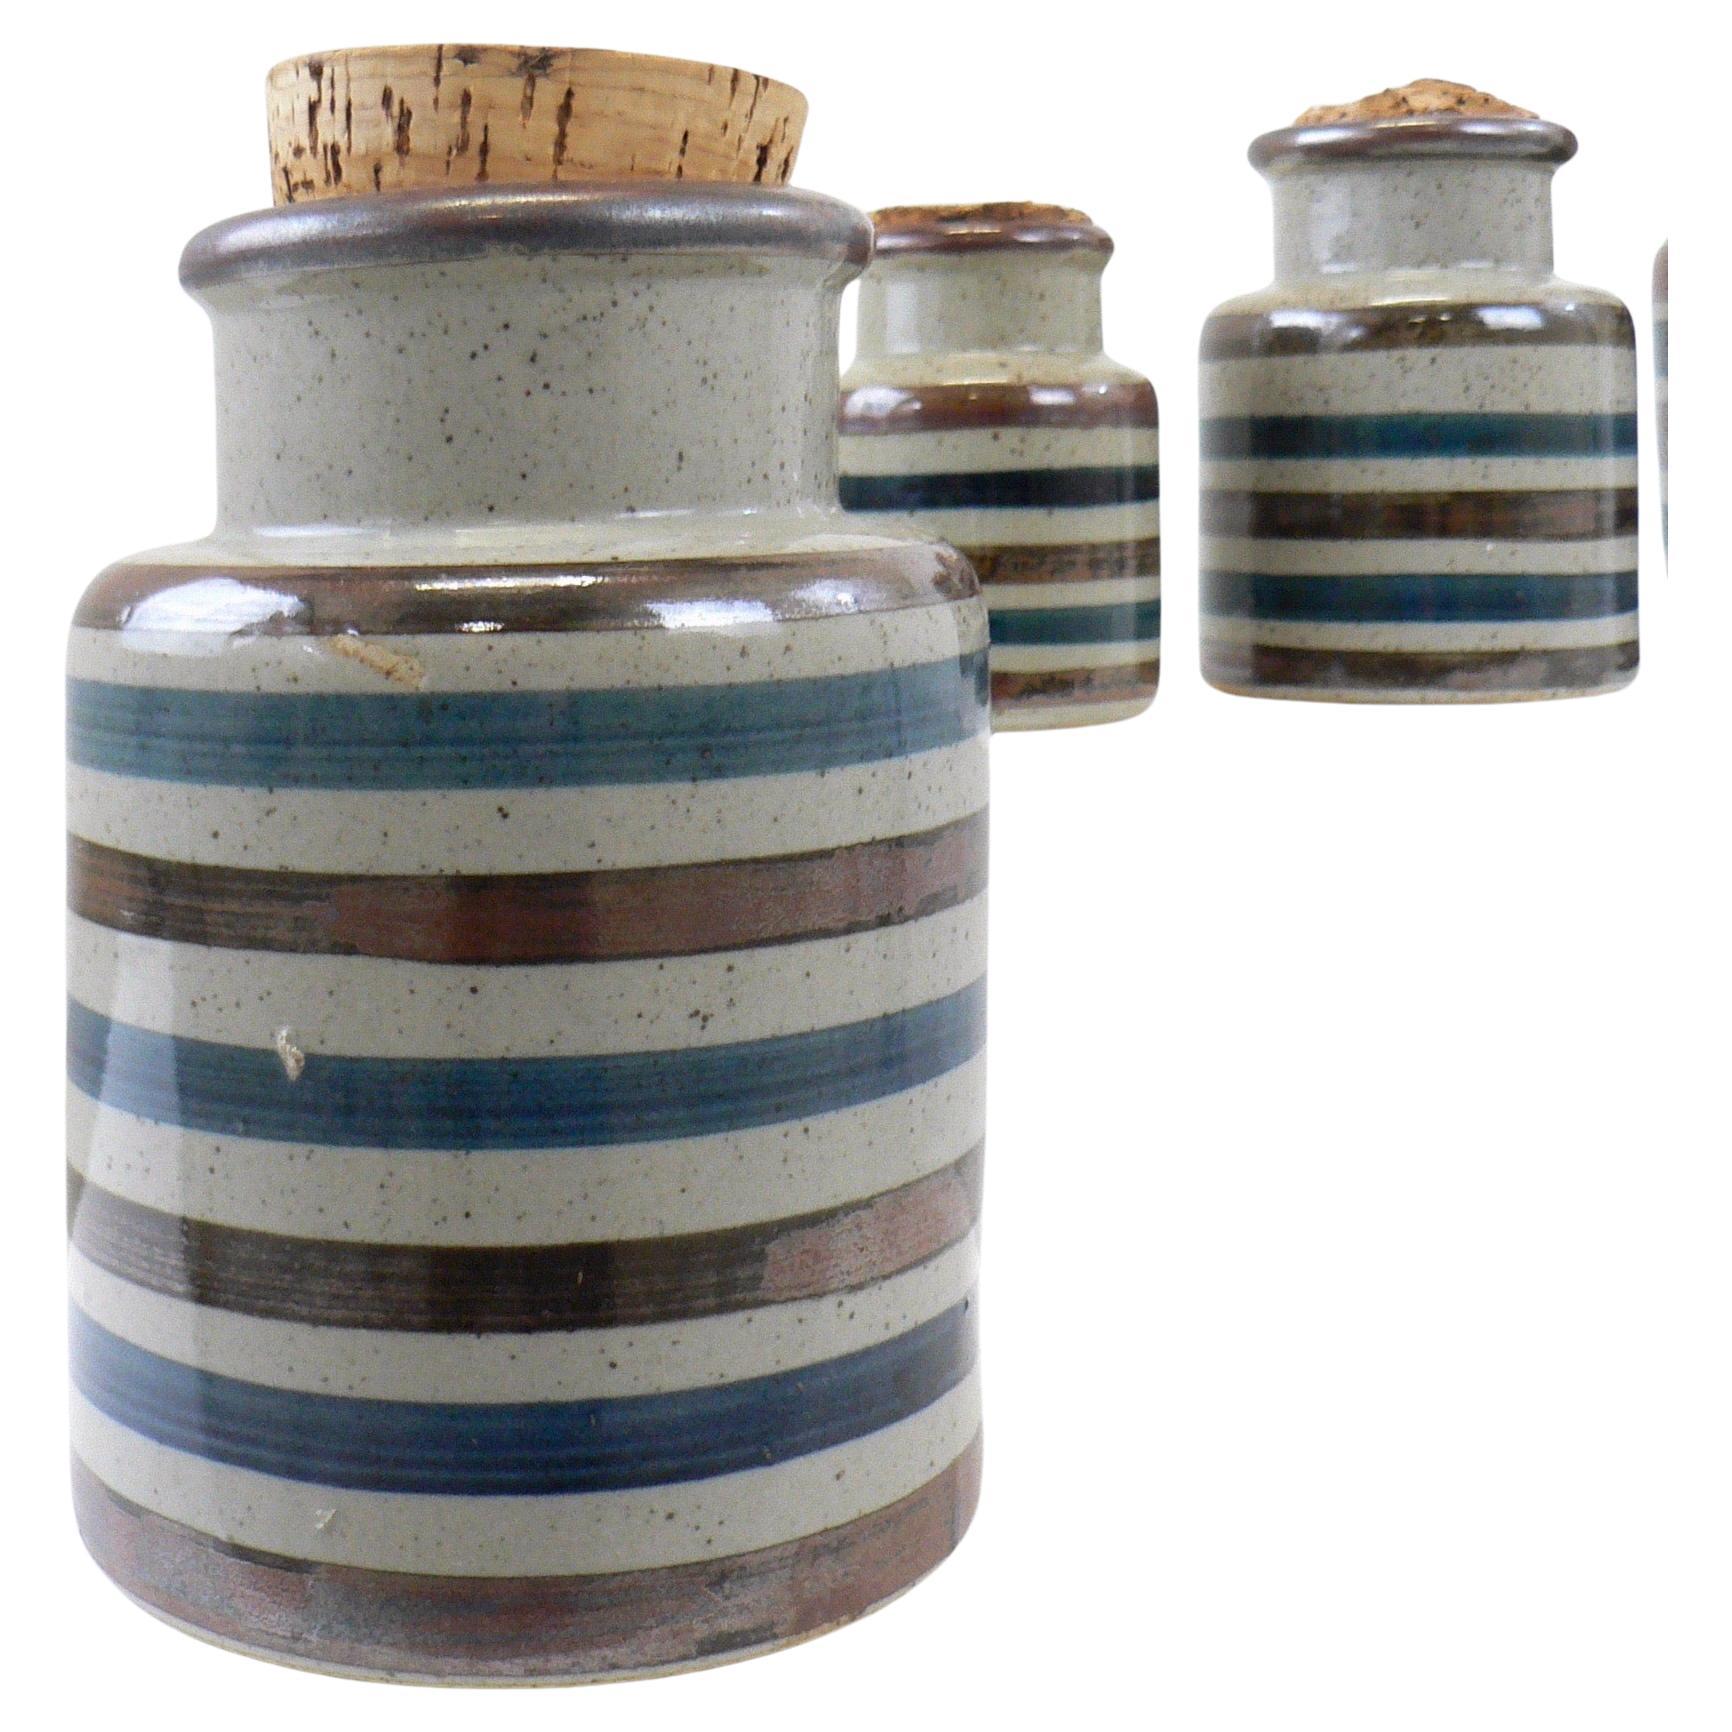 A Scandinavian set of four porcelain spice jars with cork stoppers.

Dimensions:
Height: 16,13,11 and 9
Diameter: 12,11,9 and 7